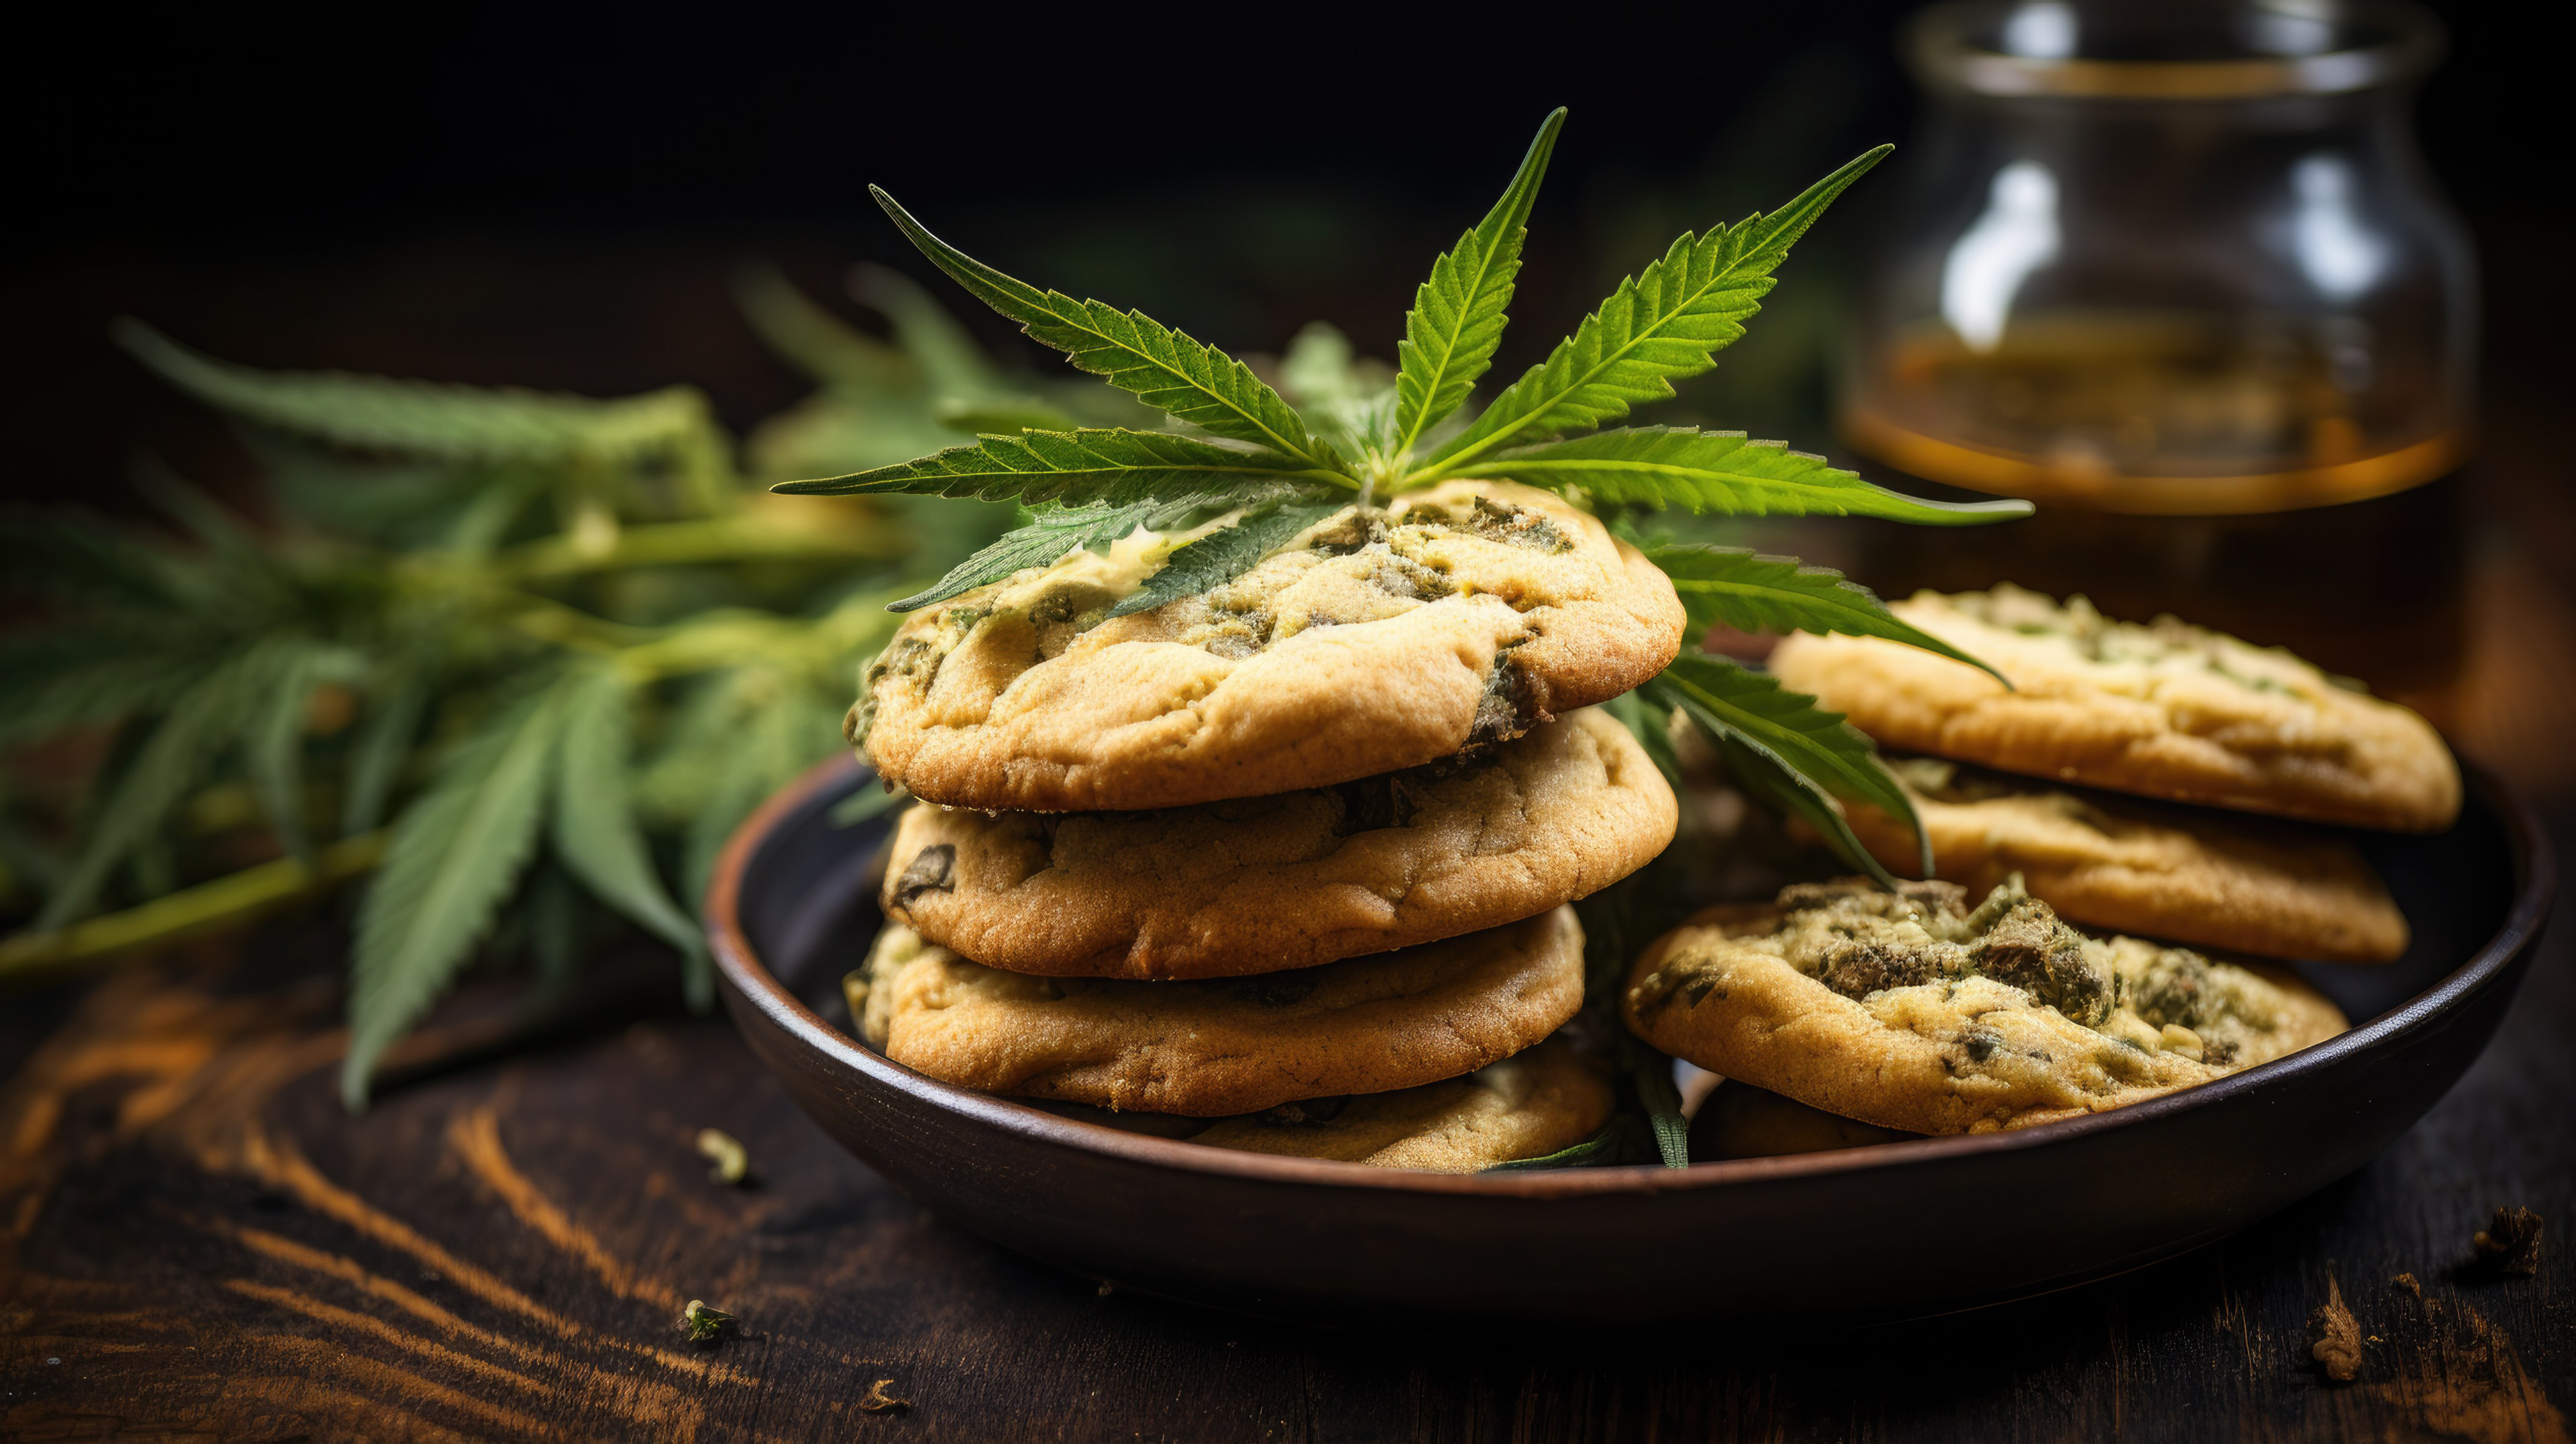 The power of hemp is undeniable, helping pave the way for many avenues in recreation and the potential benefits to someone's health and to create everyday products.